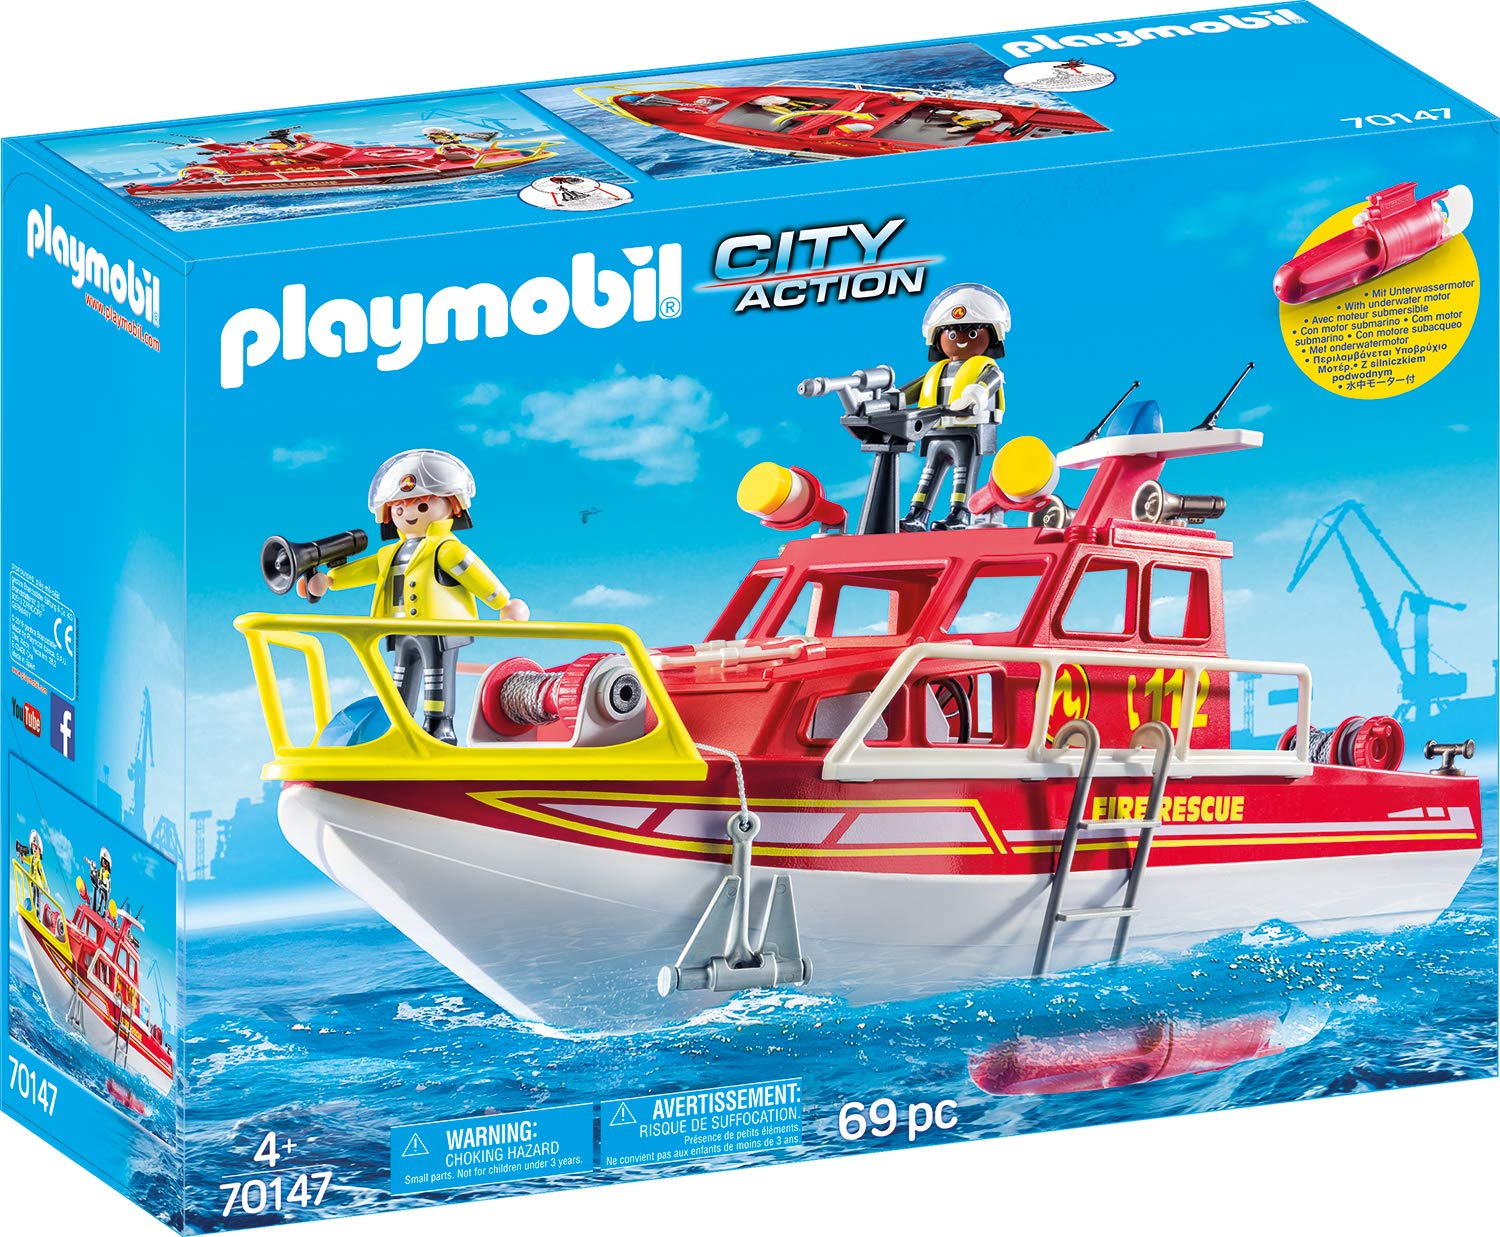 Playmobil City Action Fire Extinguisher Boat Colourful